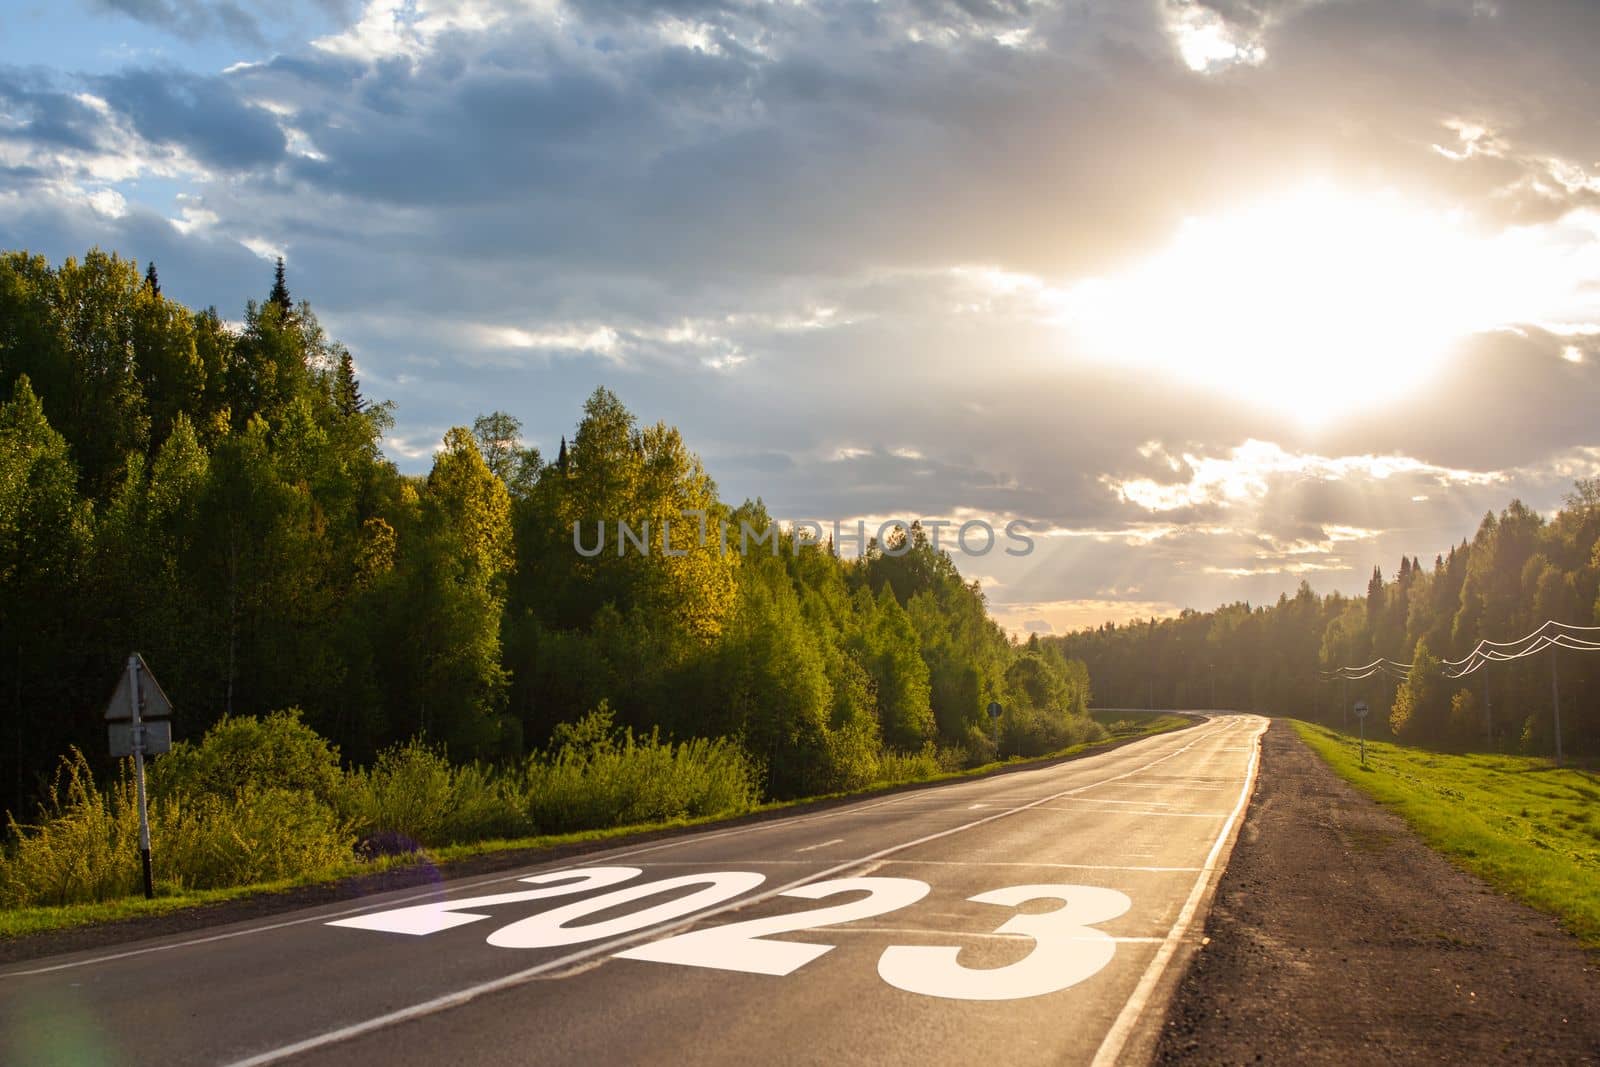 2023 written on highway road in the middle of empty asphalt road and beautiful blue sky. Concept for vision new year 2023.